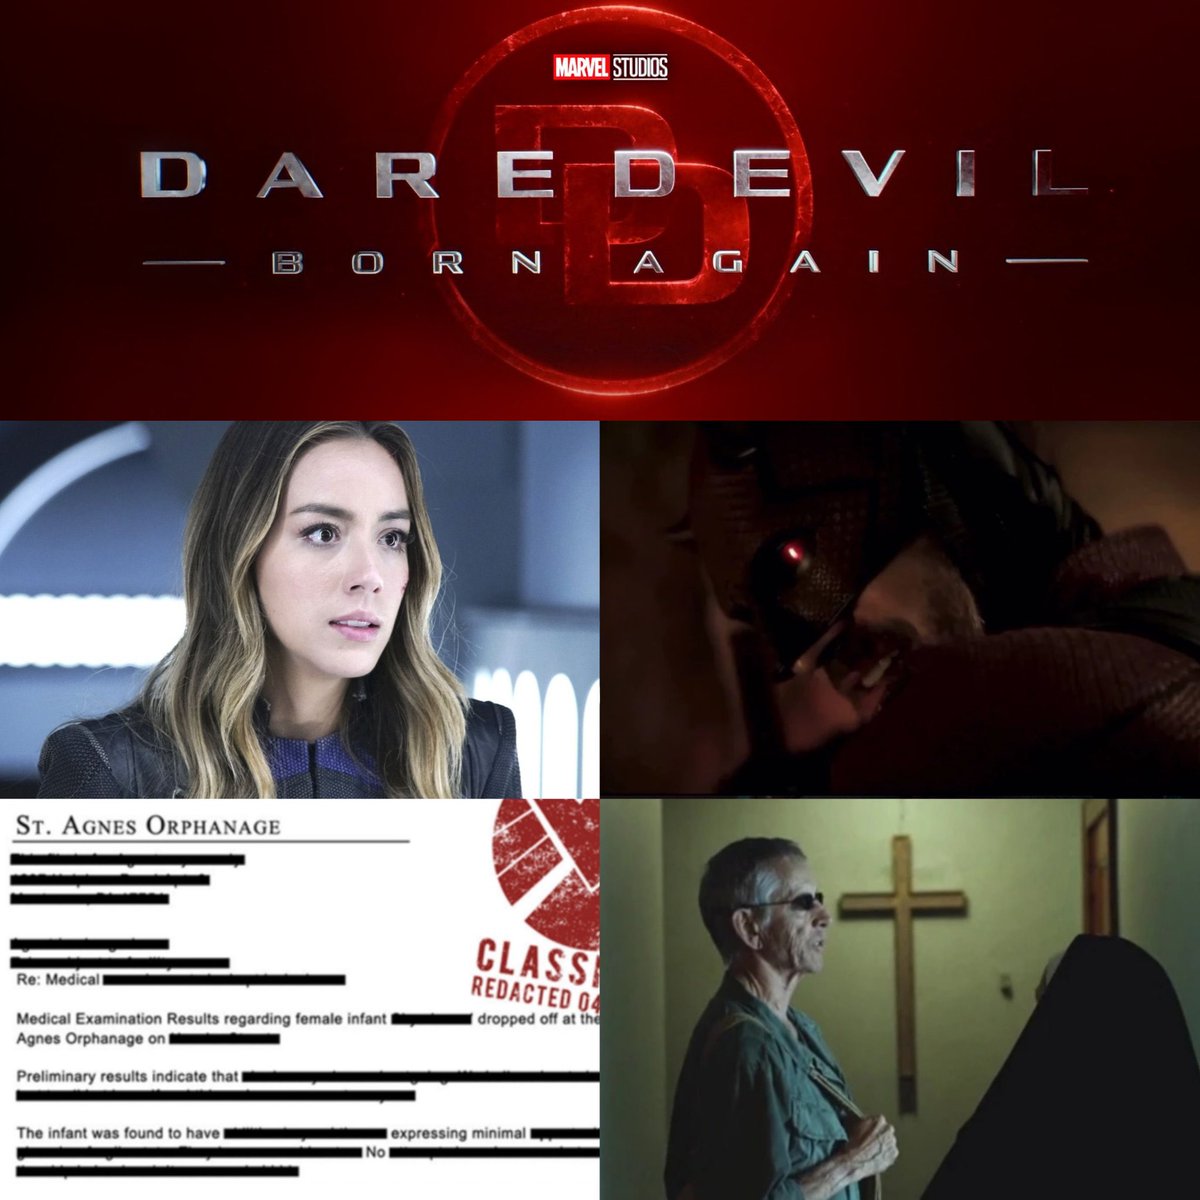 Today is the national day of the Superheroes because here are my favorites. #Daredevil #DaisyJohnson #CharlieCox #ChloeBennet #DaredevilBornAgain #AgentsofShieldForever #DaisyLives